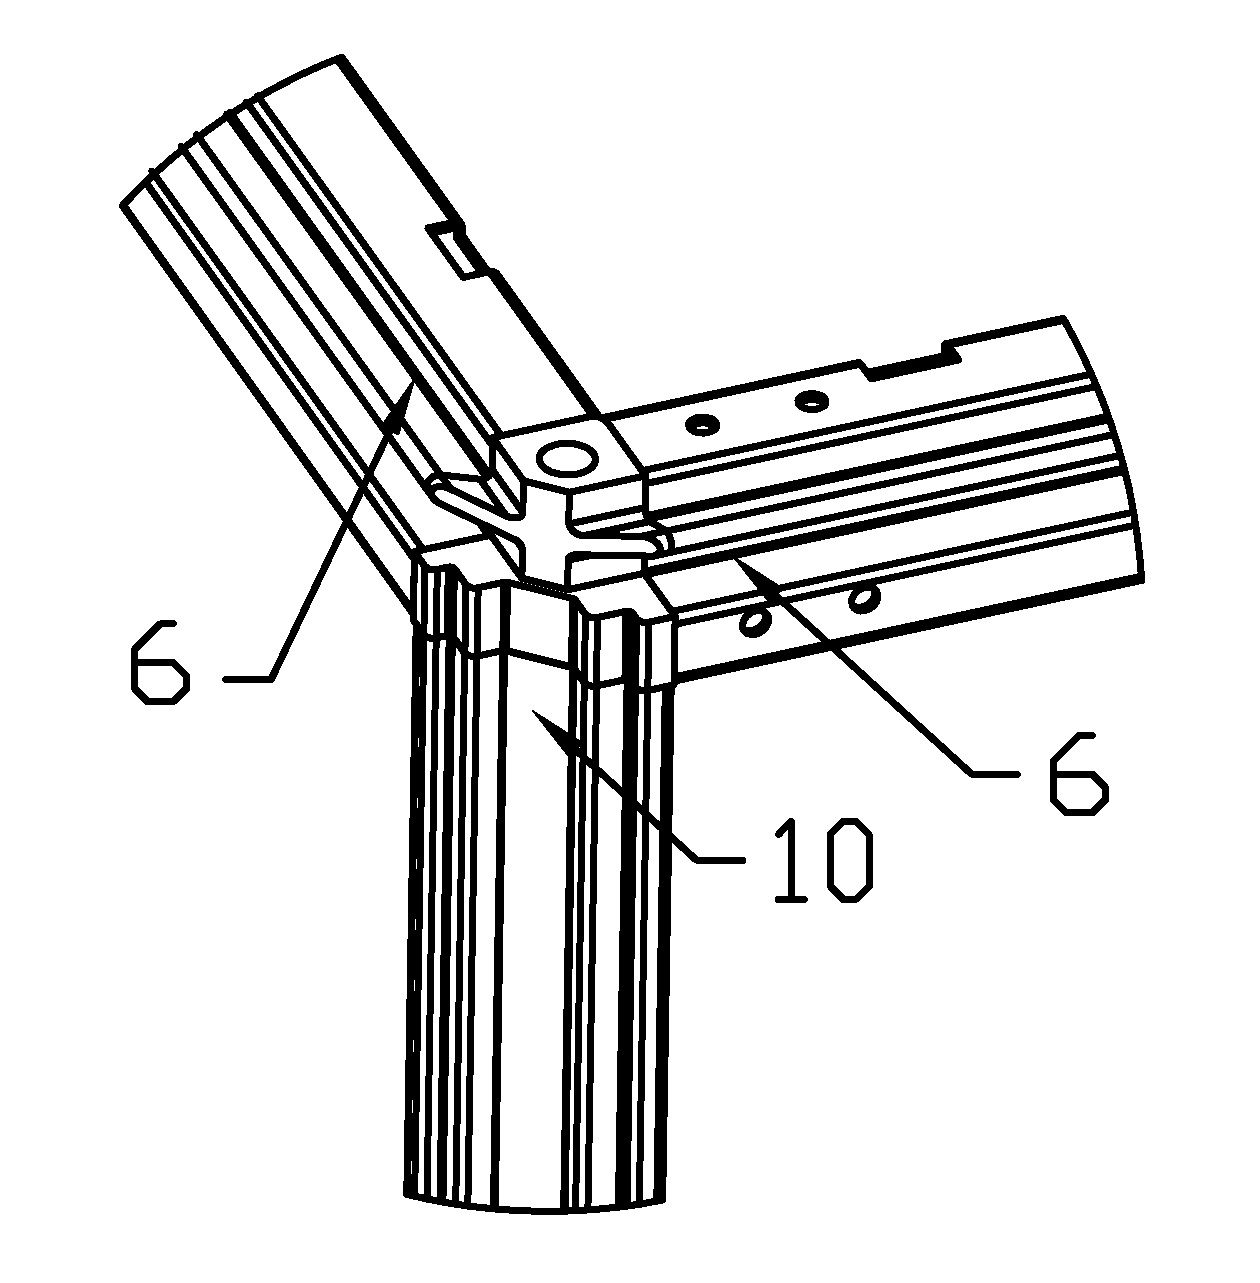 Three-way connector for cabinet frame